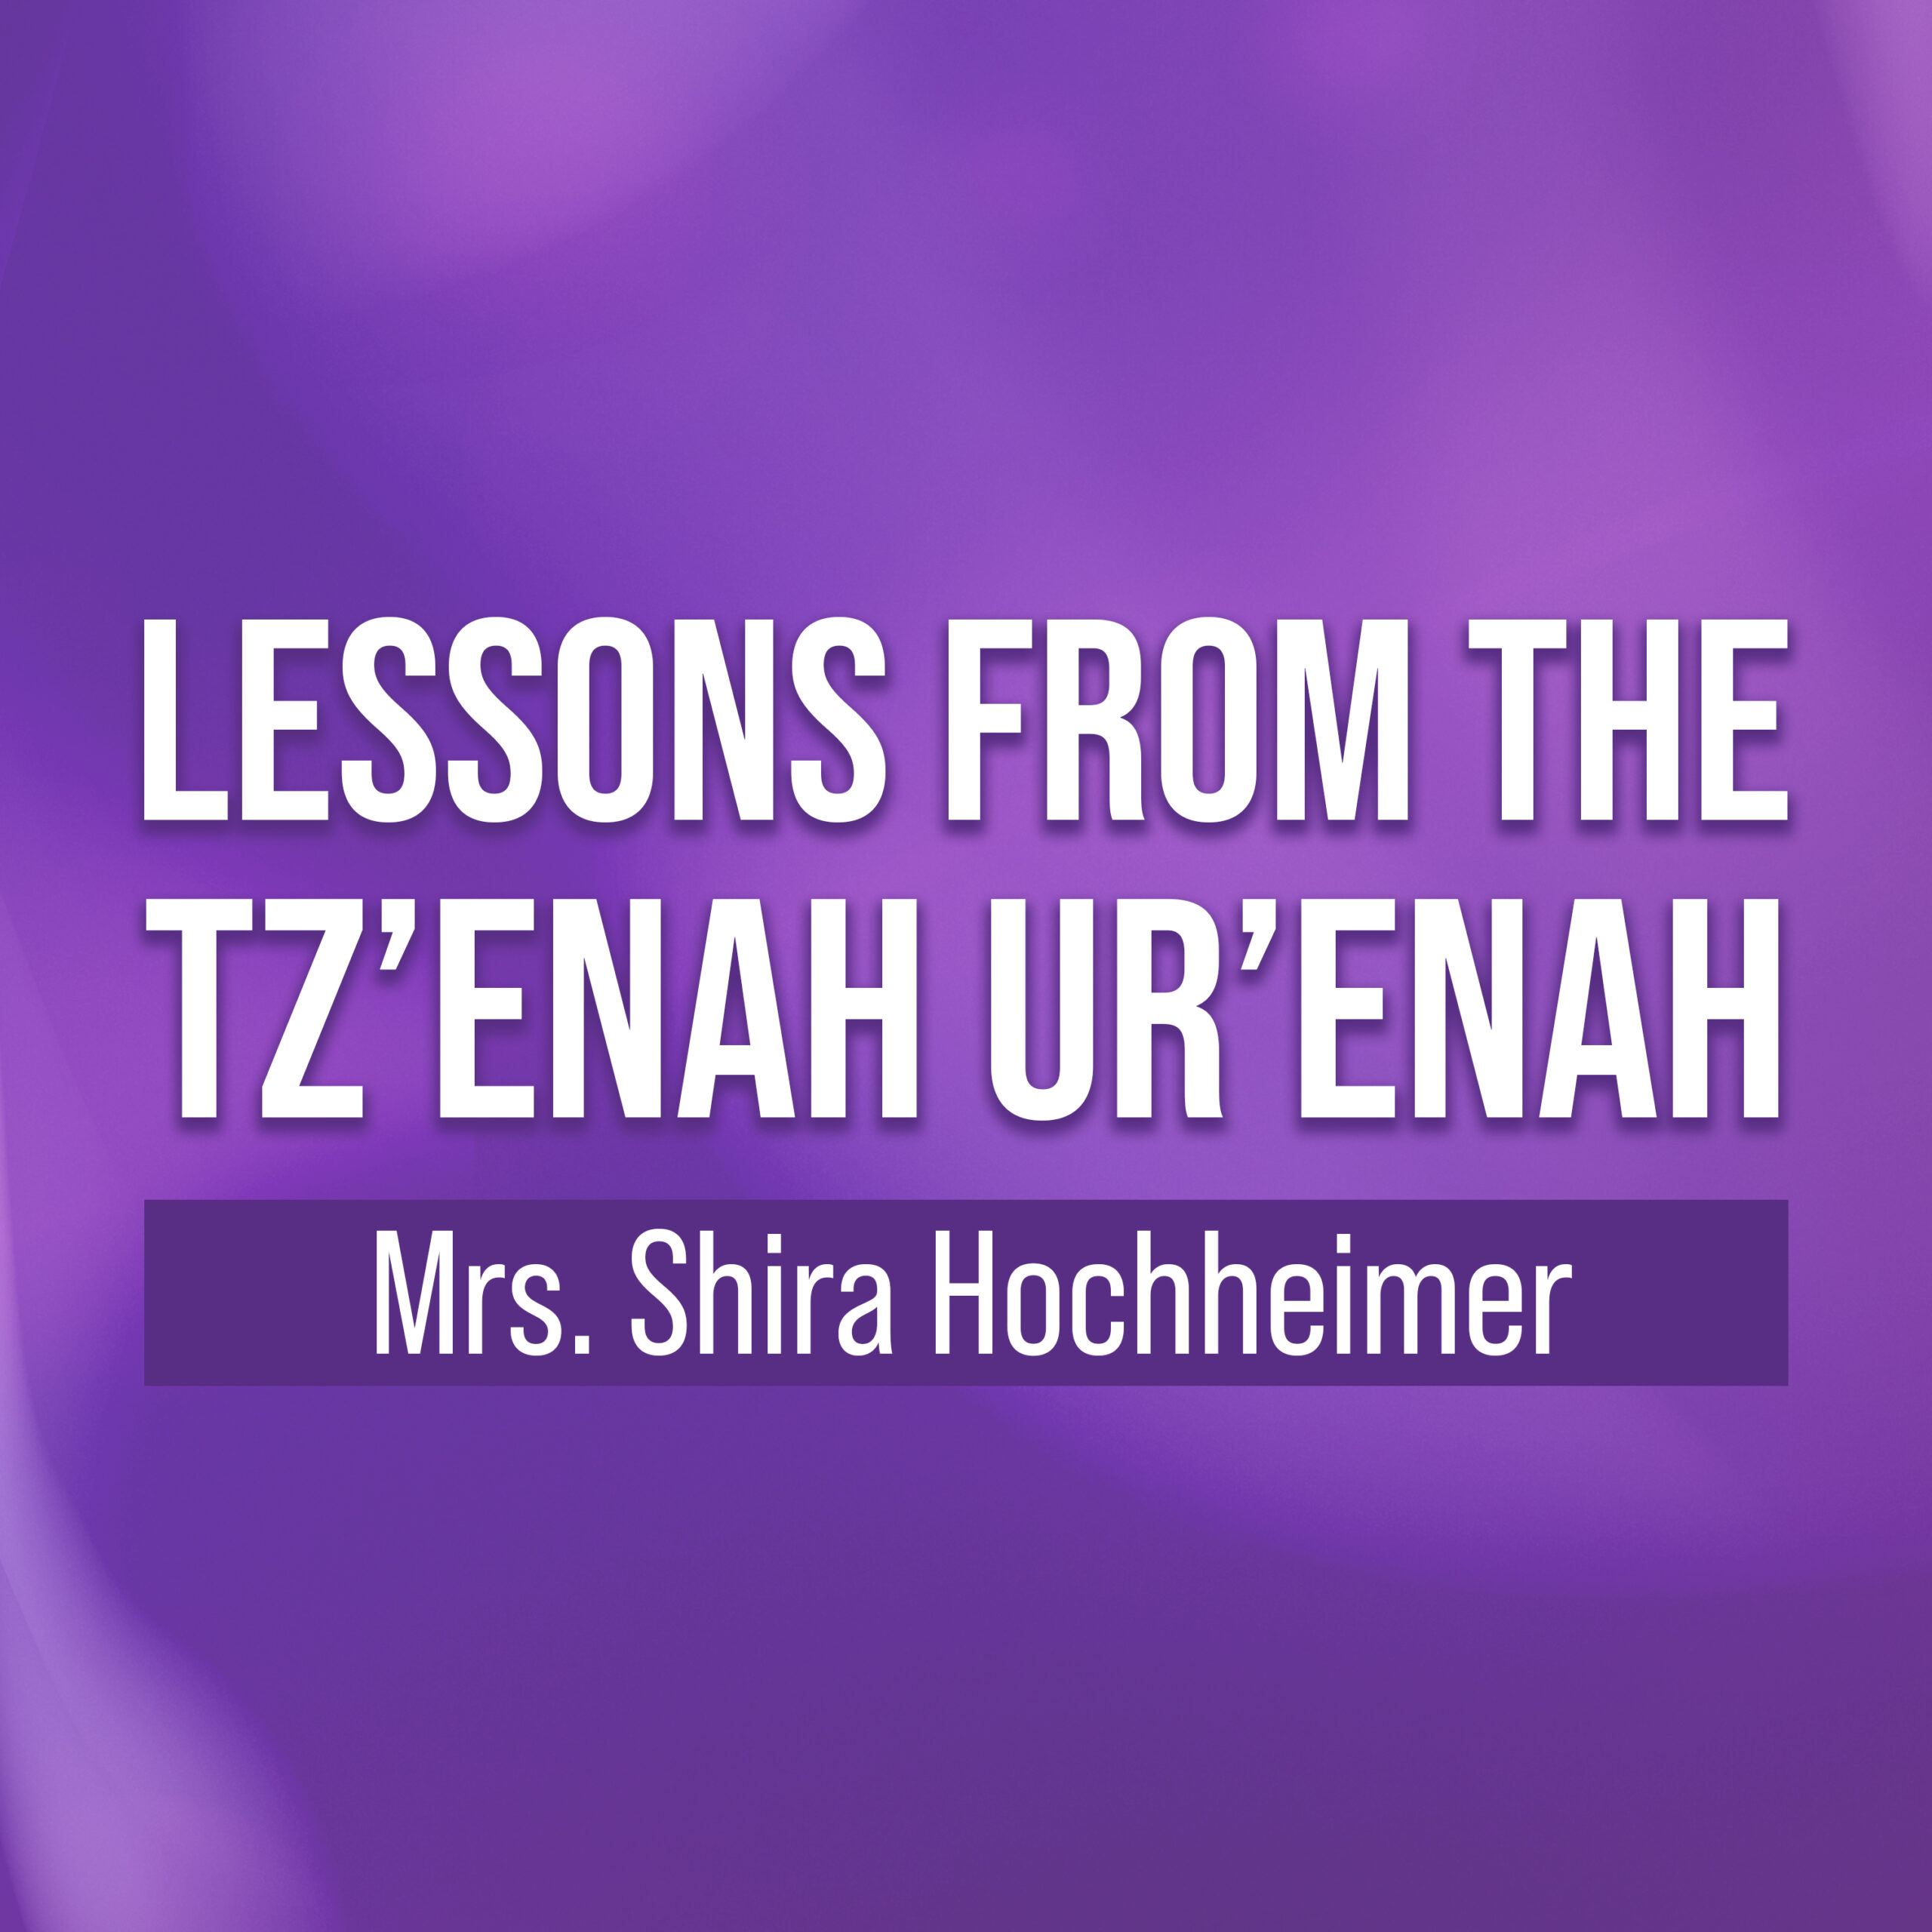 Serving Hashem - Lessons from day 8